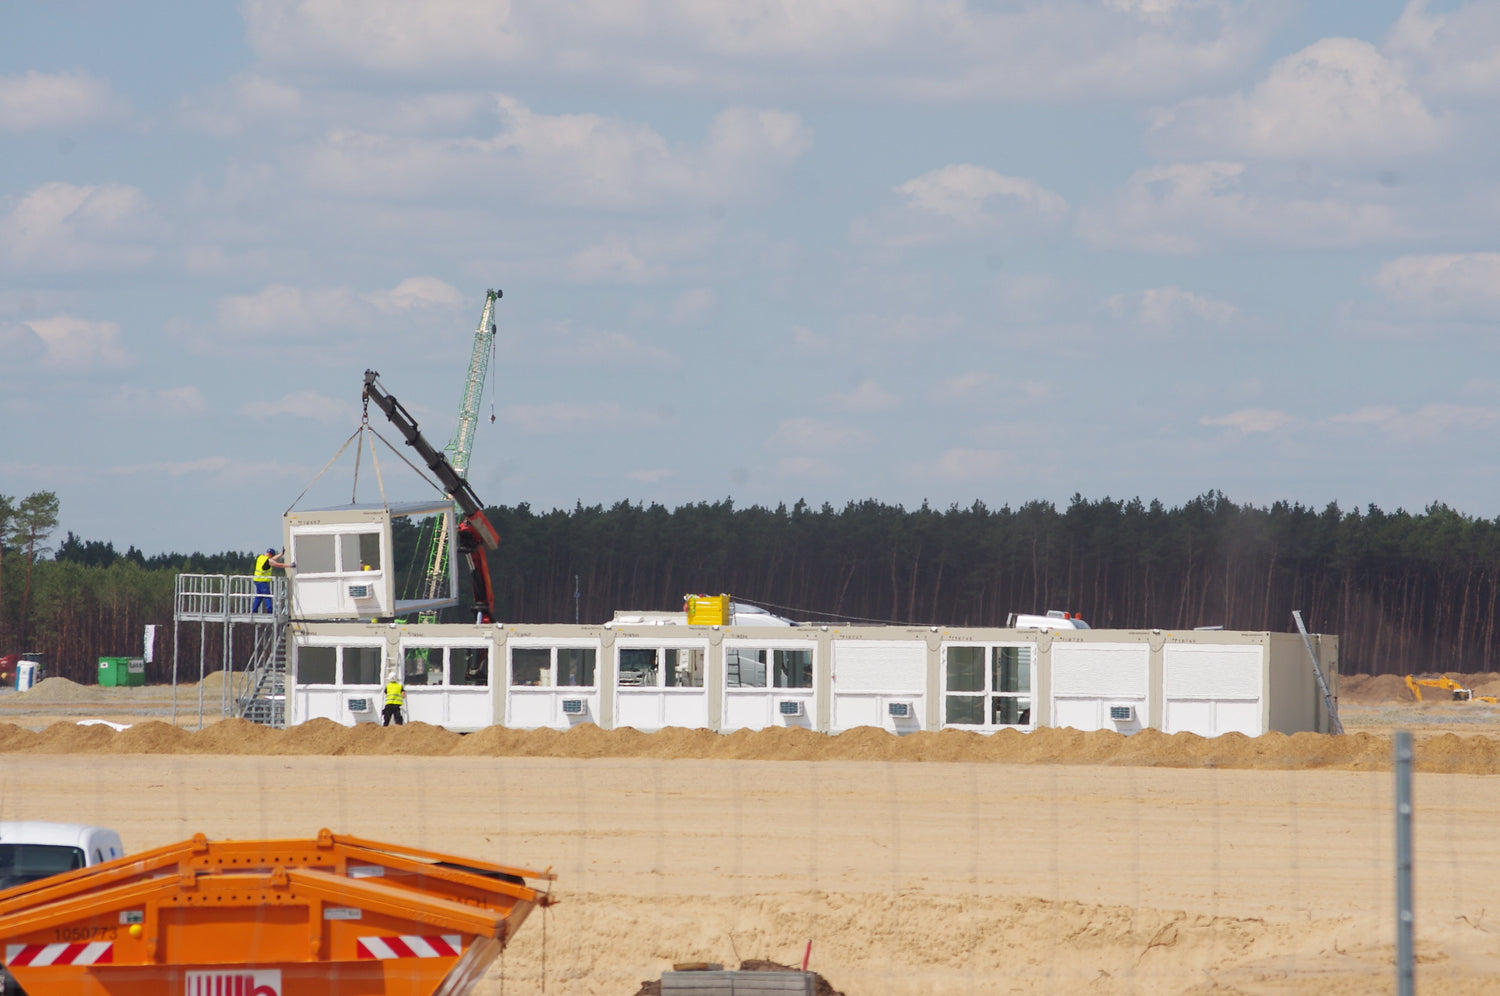 Tesla Giga Berlin Increases Workers at the  Site As Construction Moves Forward